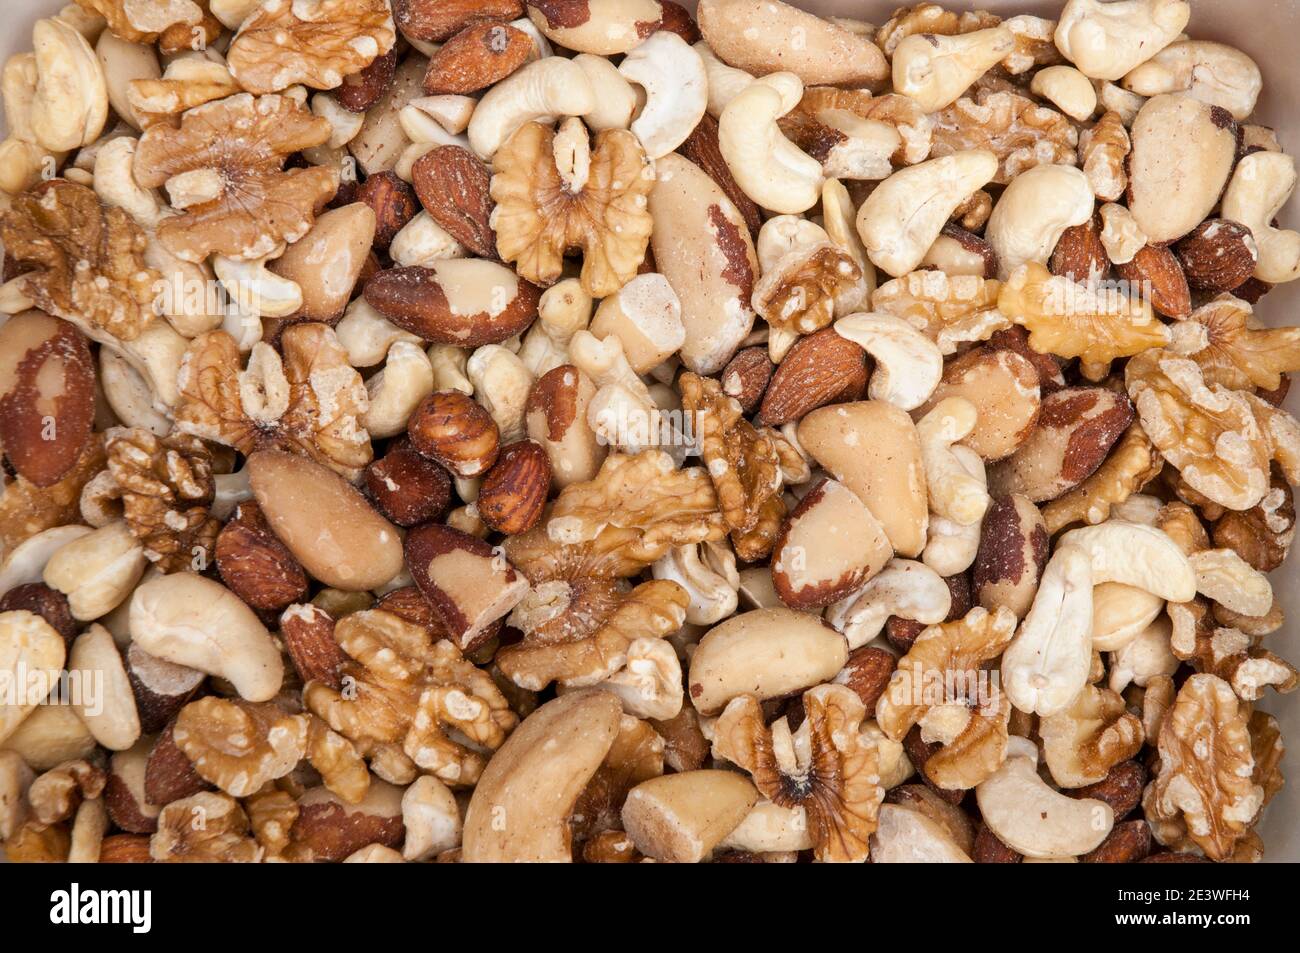 Selection of mixed nuts including Wall nuts Brazil nuts Cashew nuts Hazel nuts and Almond nuts. Daily intake of mixed nuts is good for healthy living Stock Photo